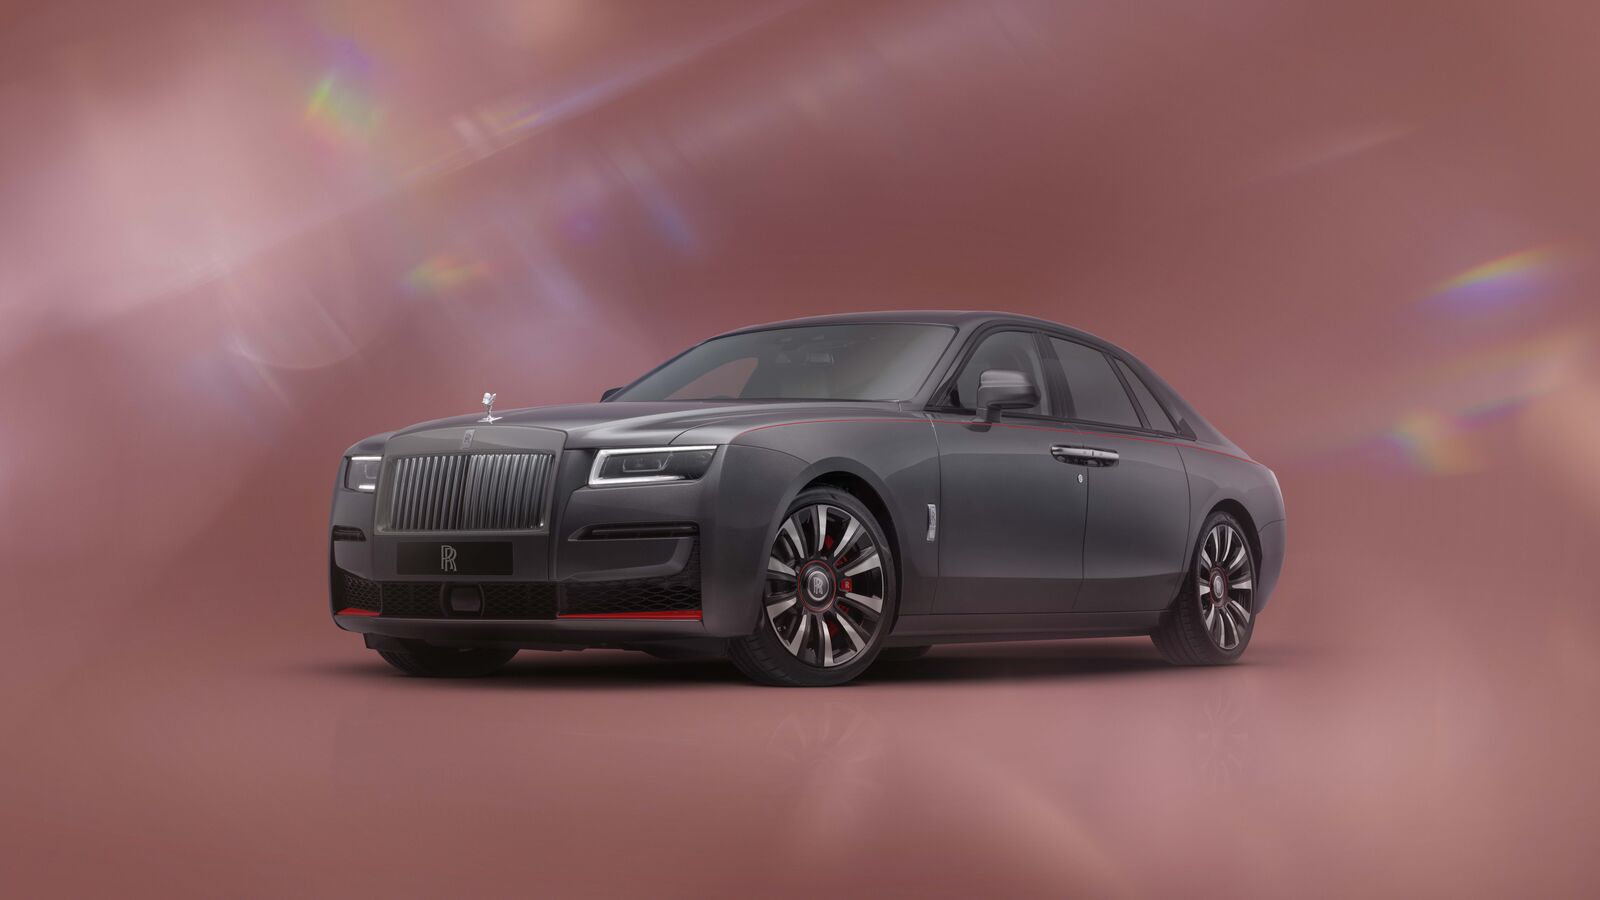 Rolls-Royce unveils Ghost ‘Prism’ to celebrate 120 years history: Check details